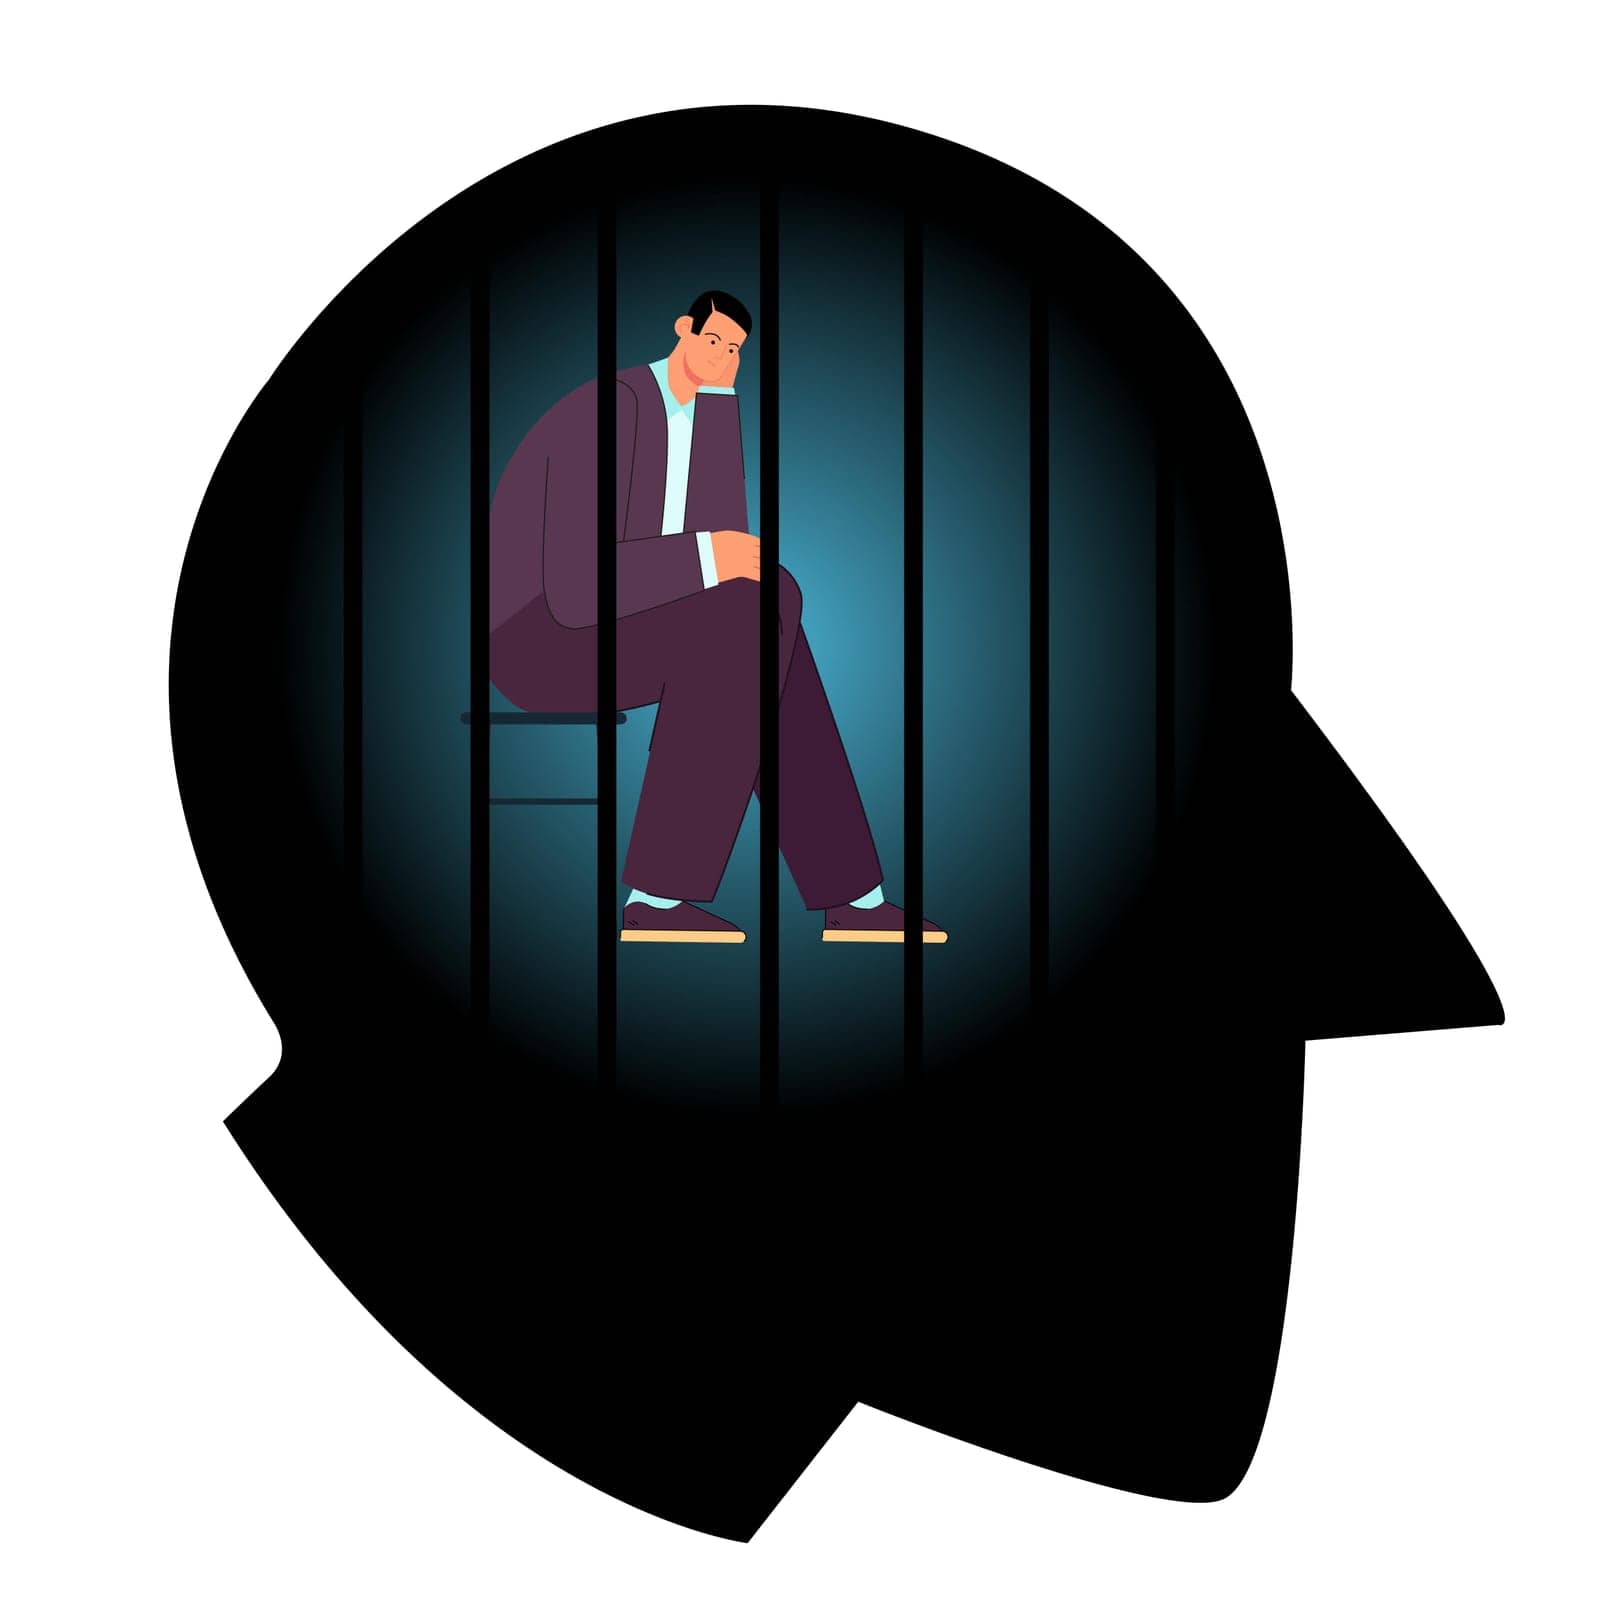 Powerless man with depression in prison of mind. Male character sitting behind narrow prison bars inside abstract human head flat vector illustration. Struggle for freedom of thought, slavery concept